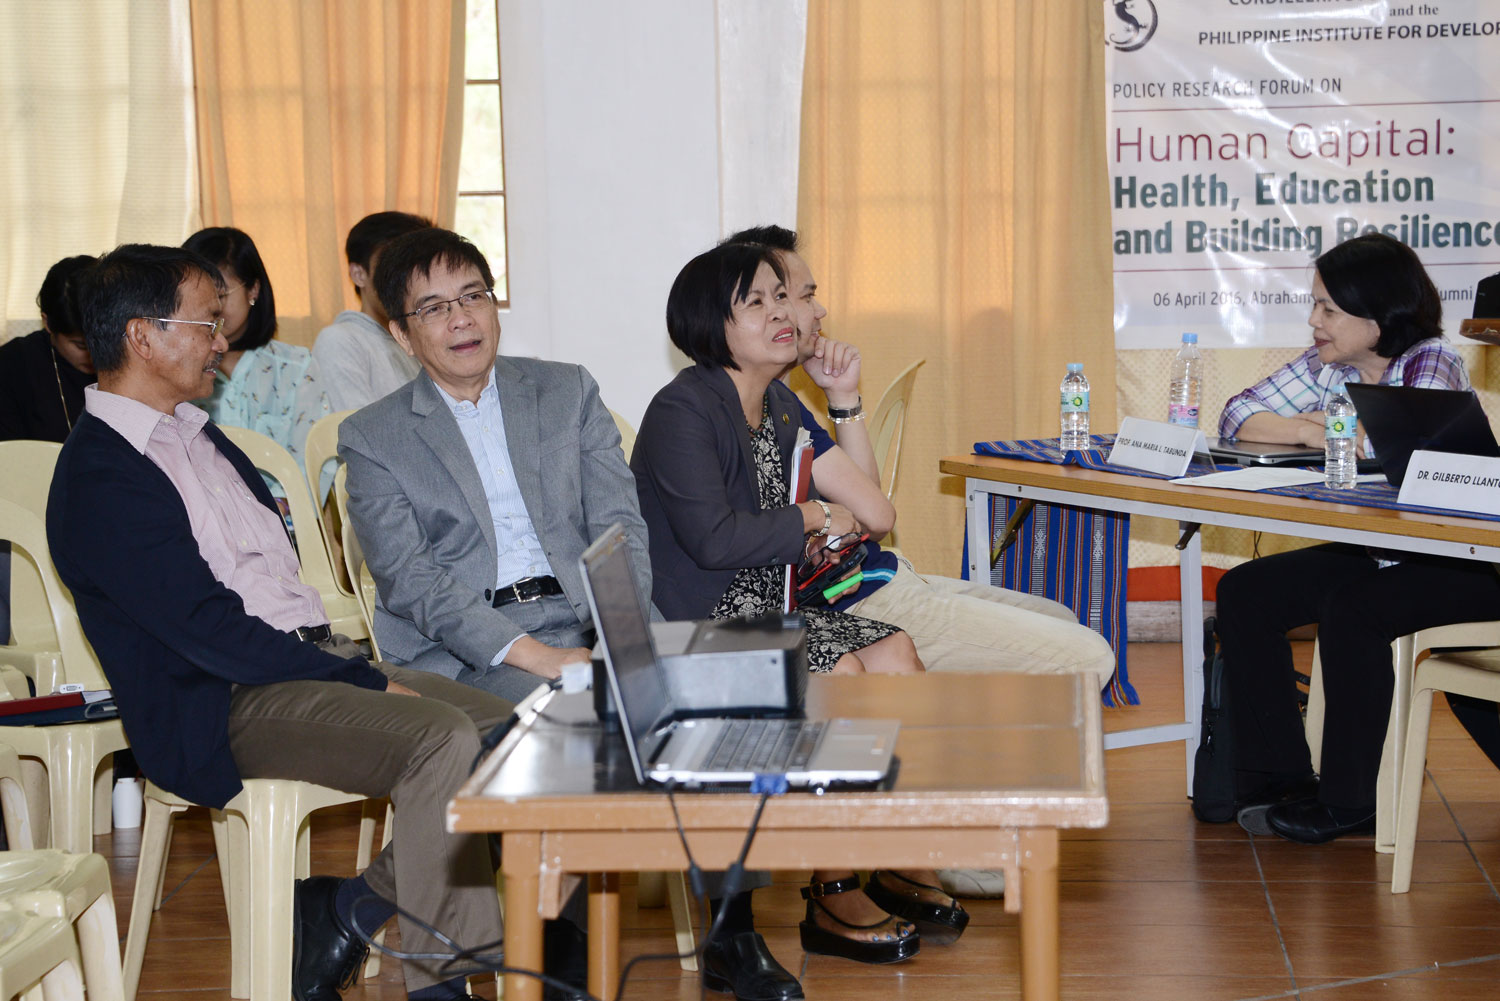 Policy Research Forum on Human Capital: Health, Education, and Building Resilience-DSC_6068.jpg